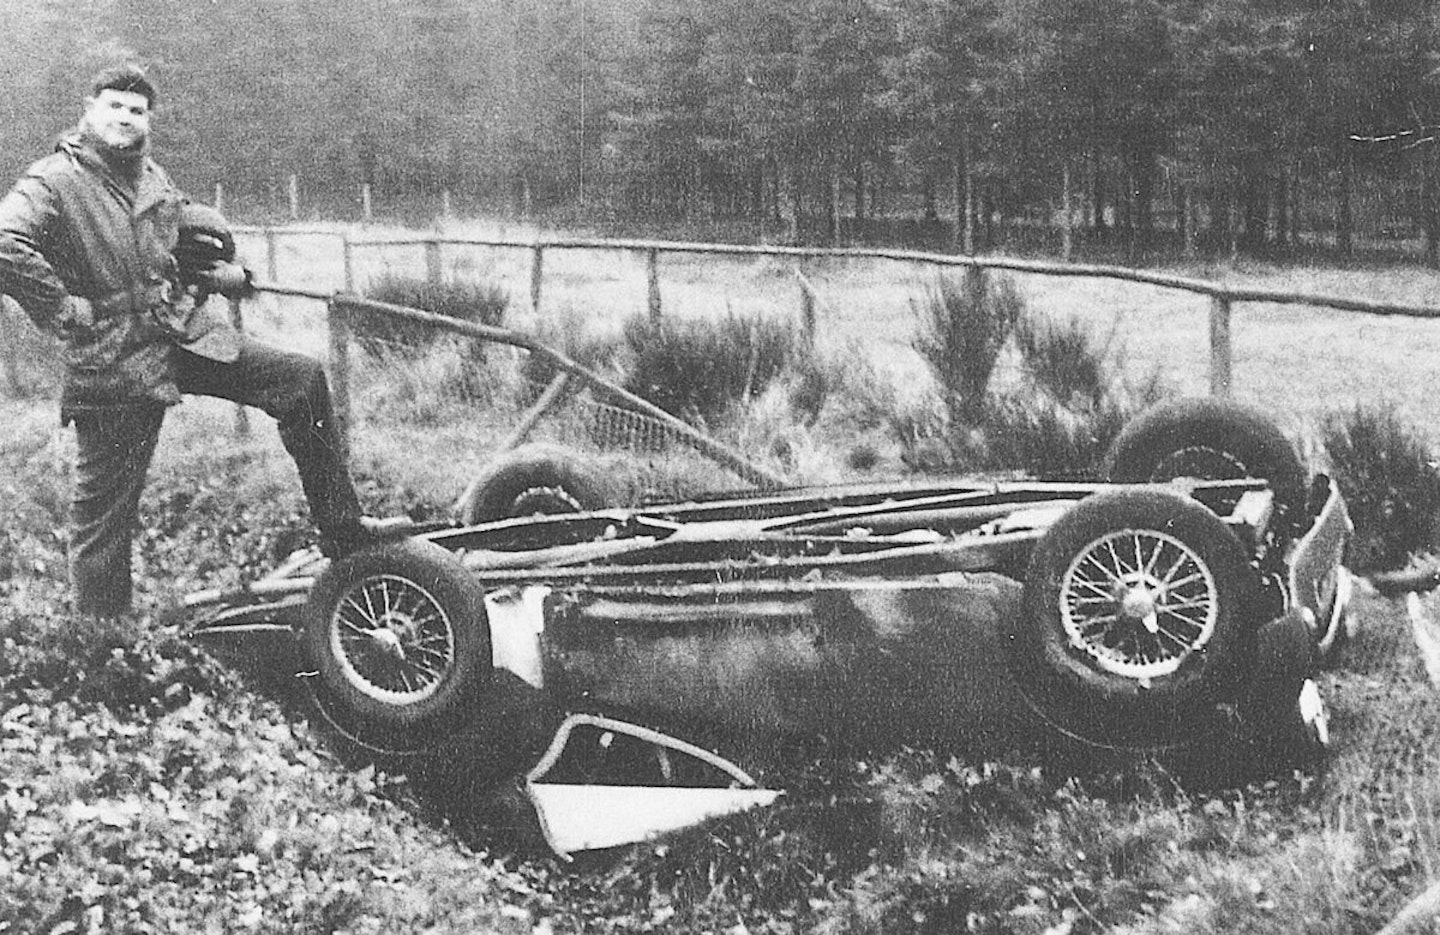 Things go slightly awry for Tony Netherton at the Nürburgring in 1958